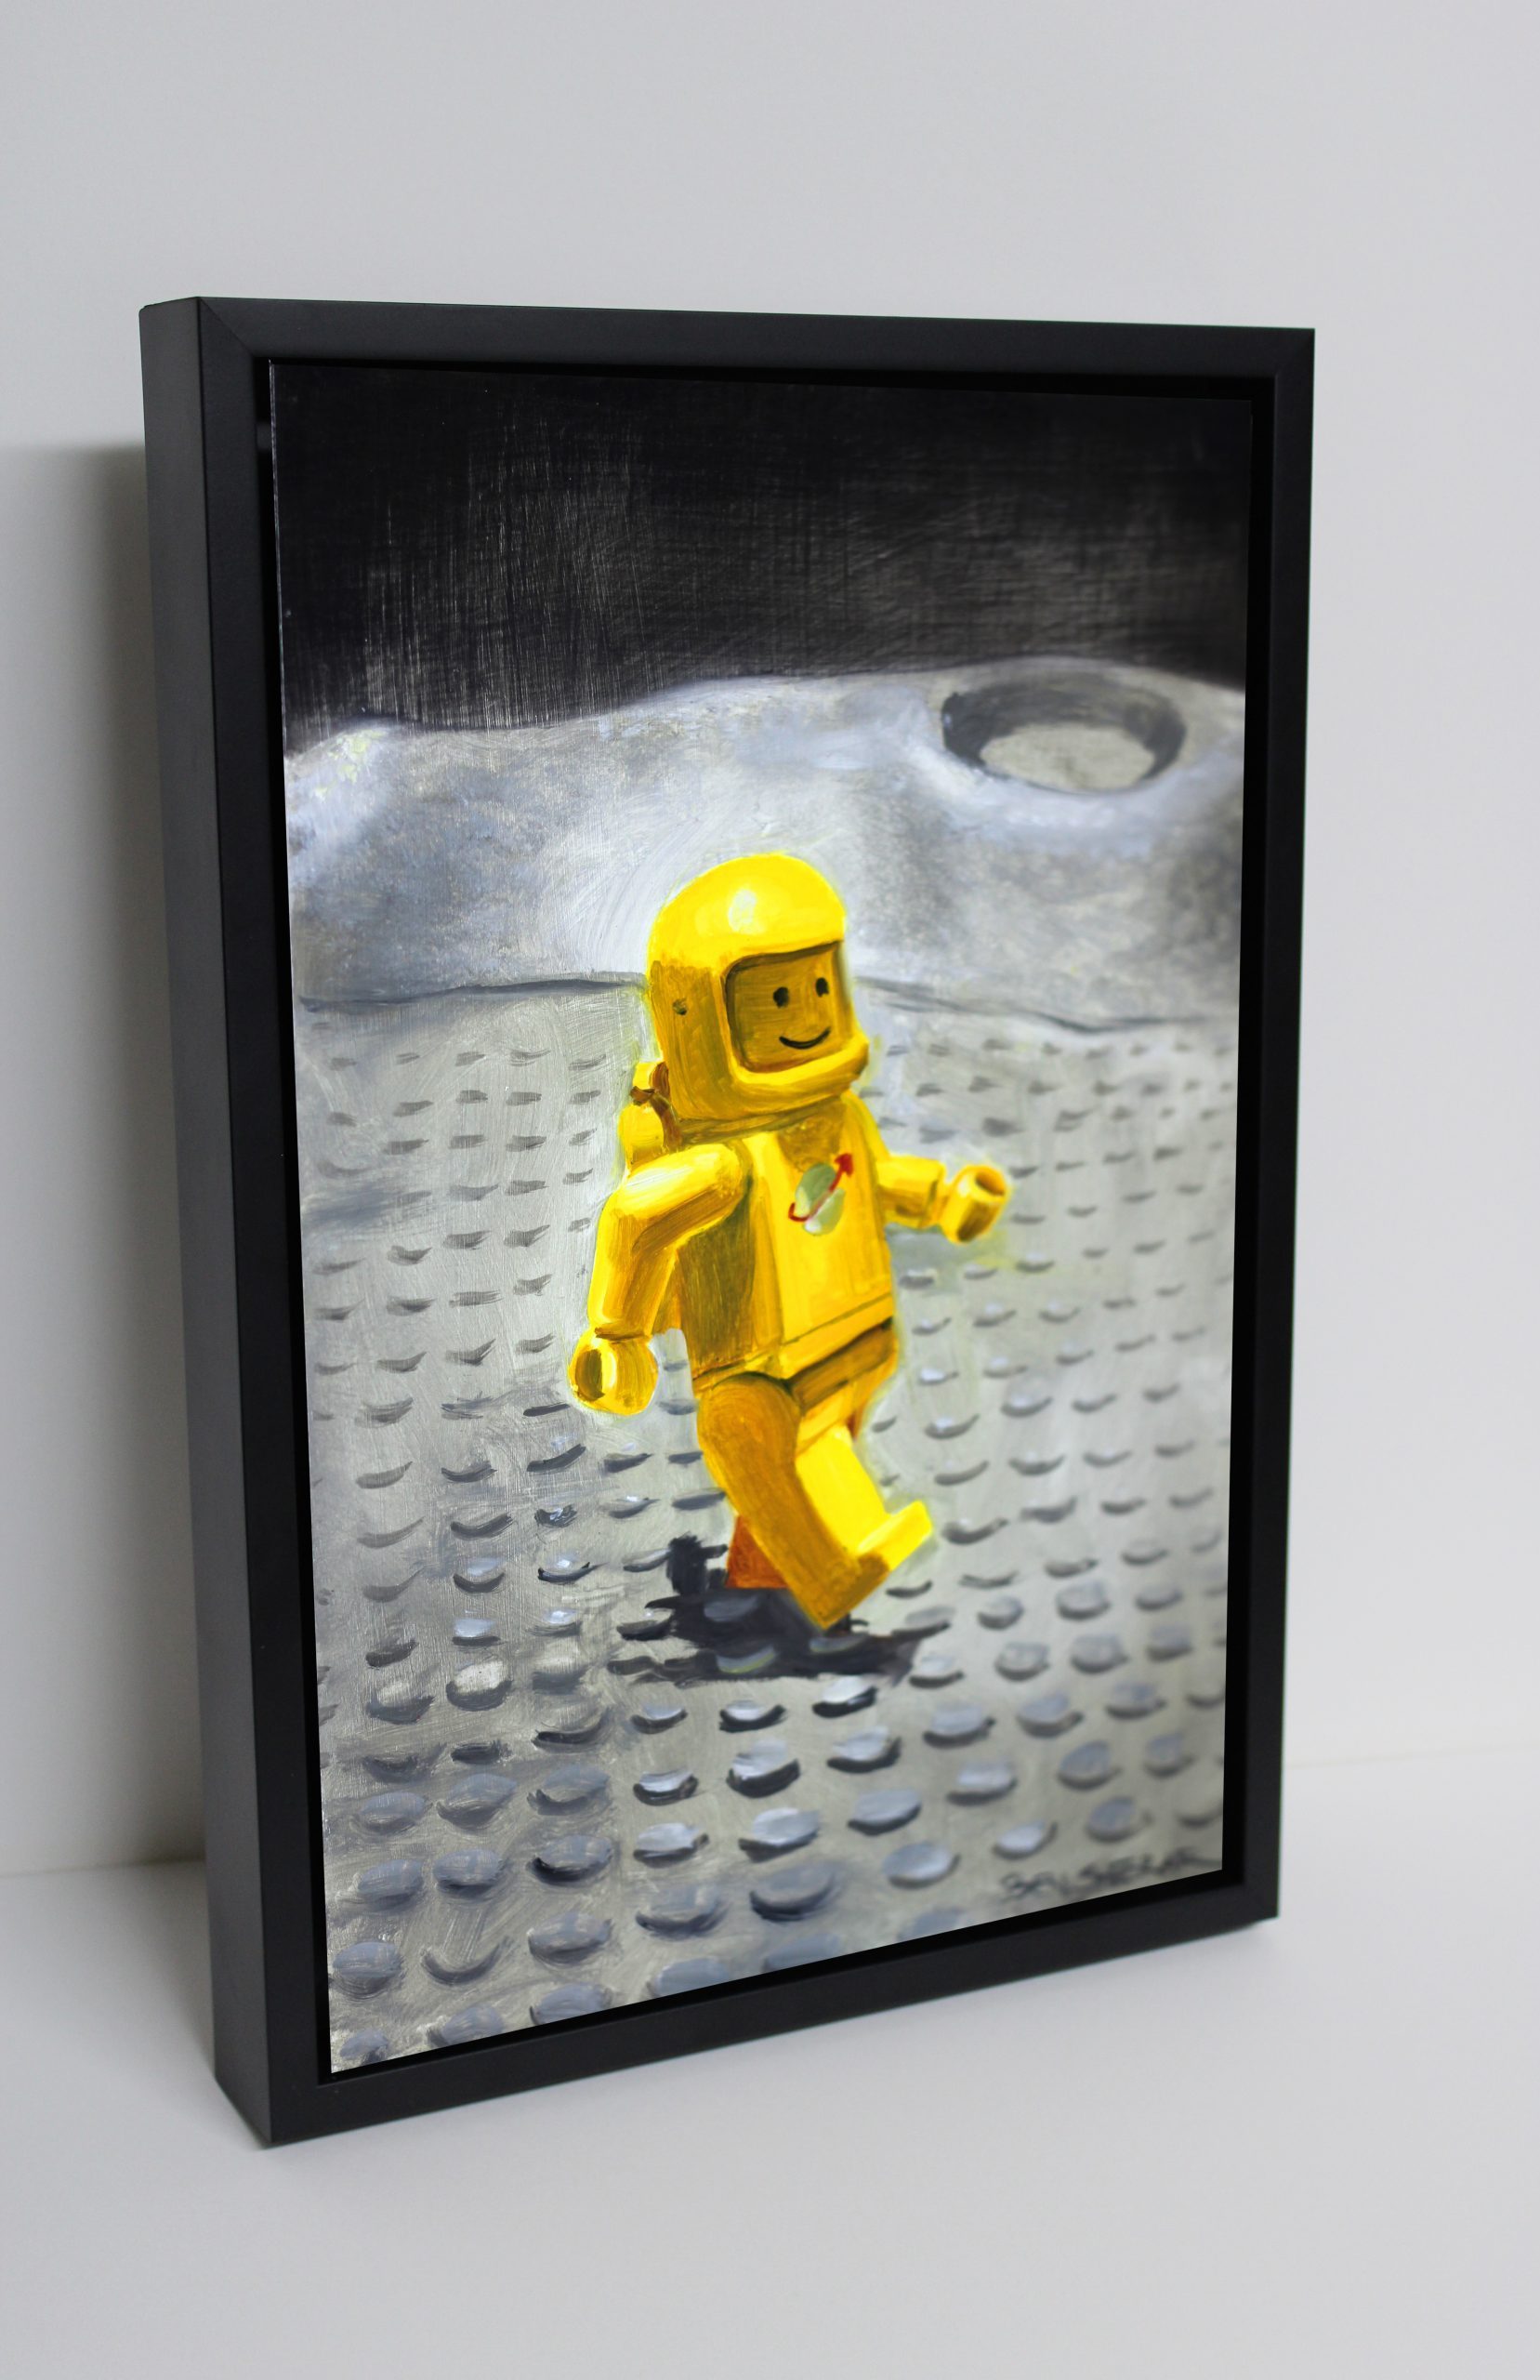 Original Framed Oil Painting of a vintage Yellow Spaceman Toy by ben Sherar